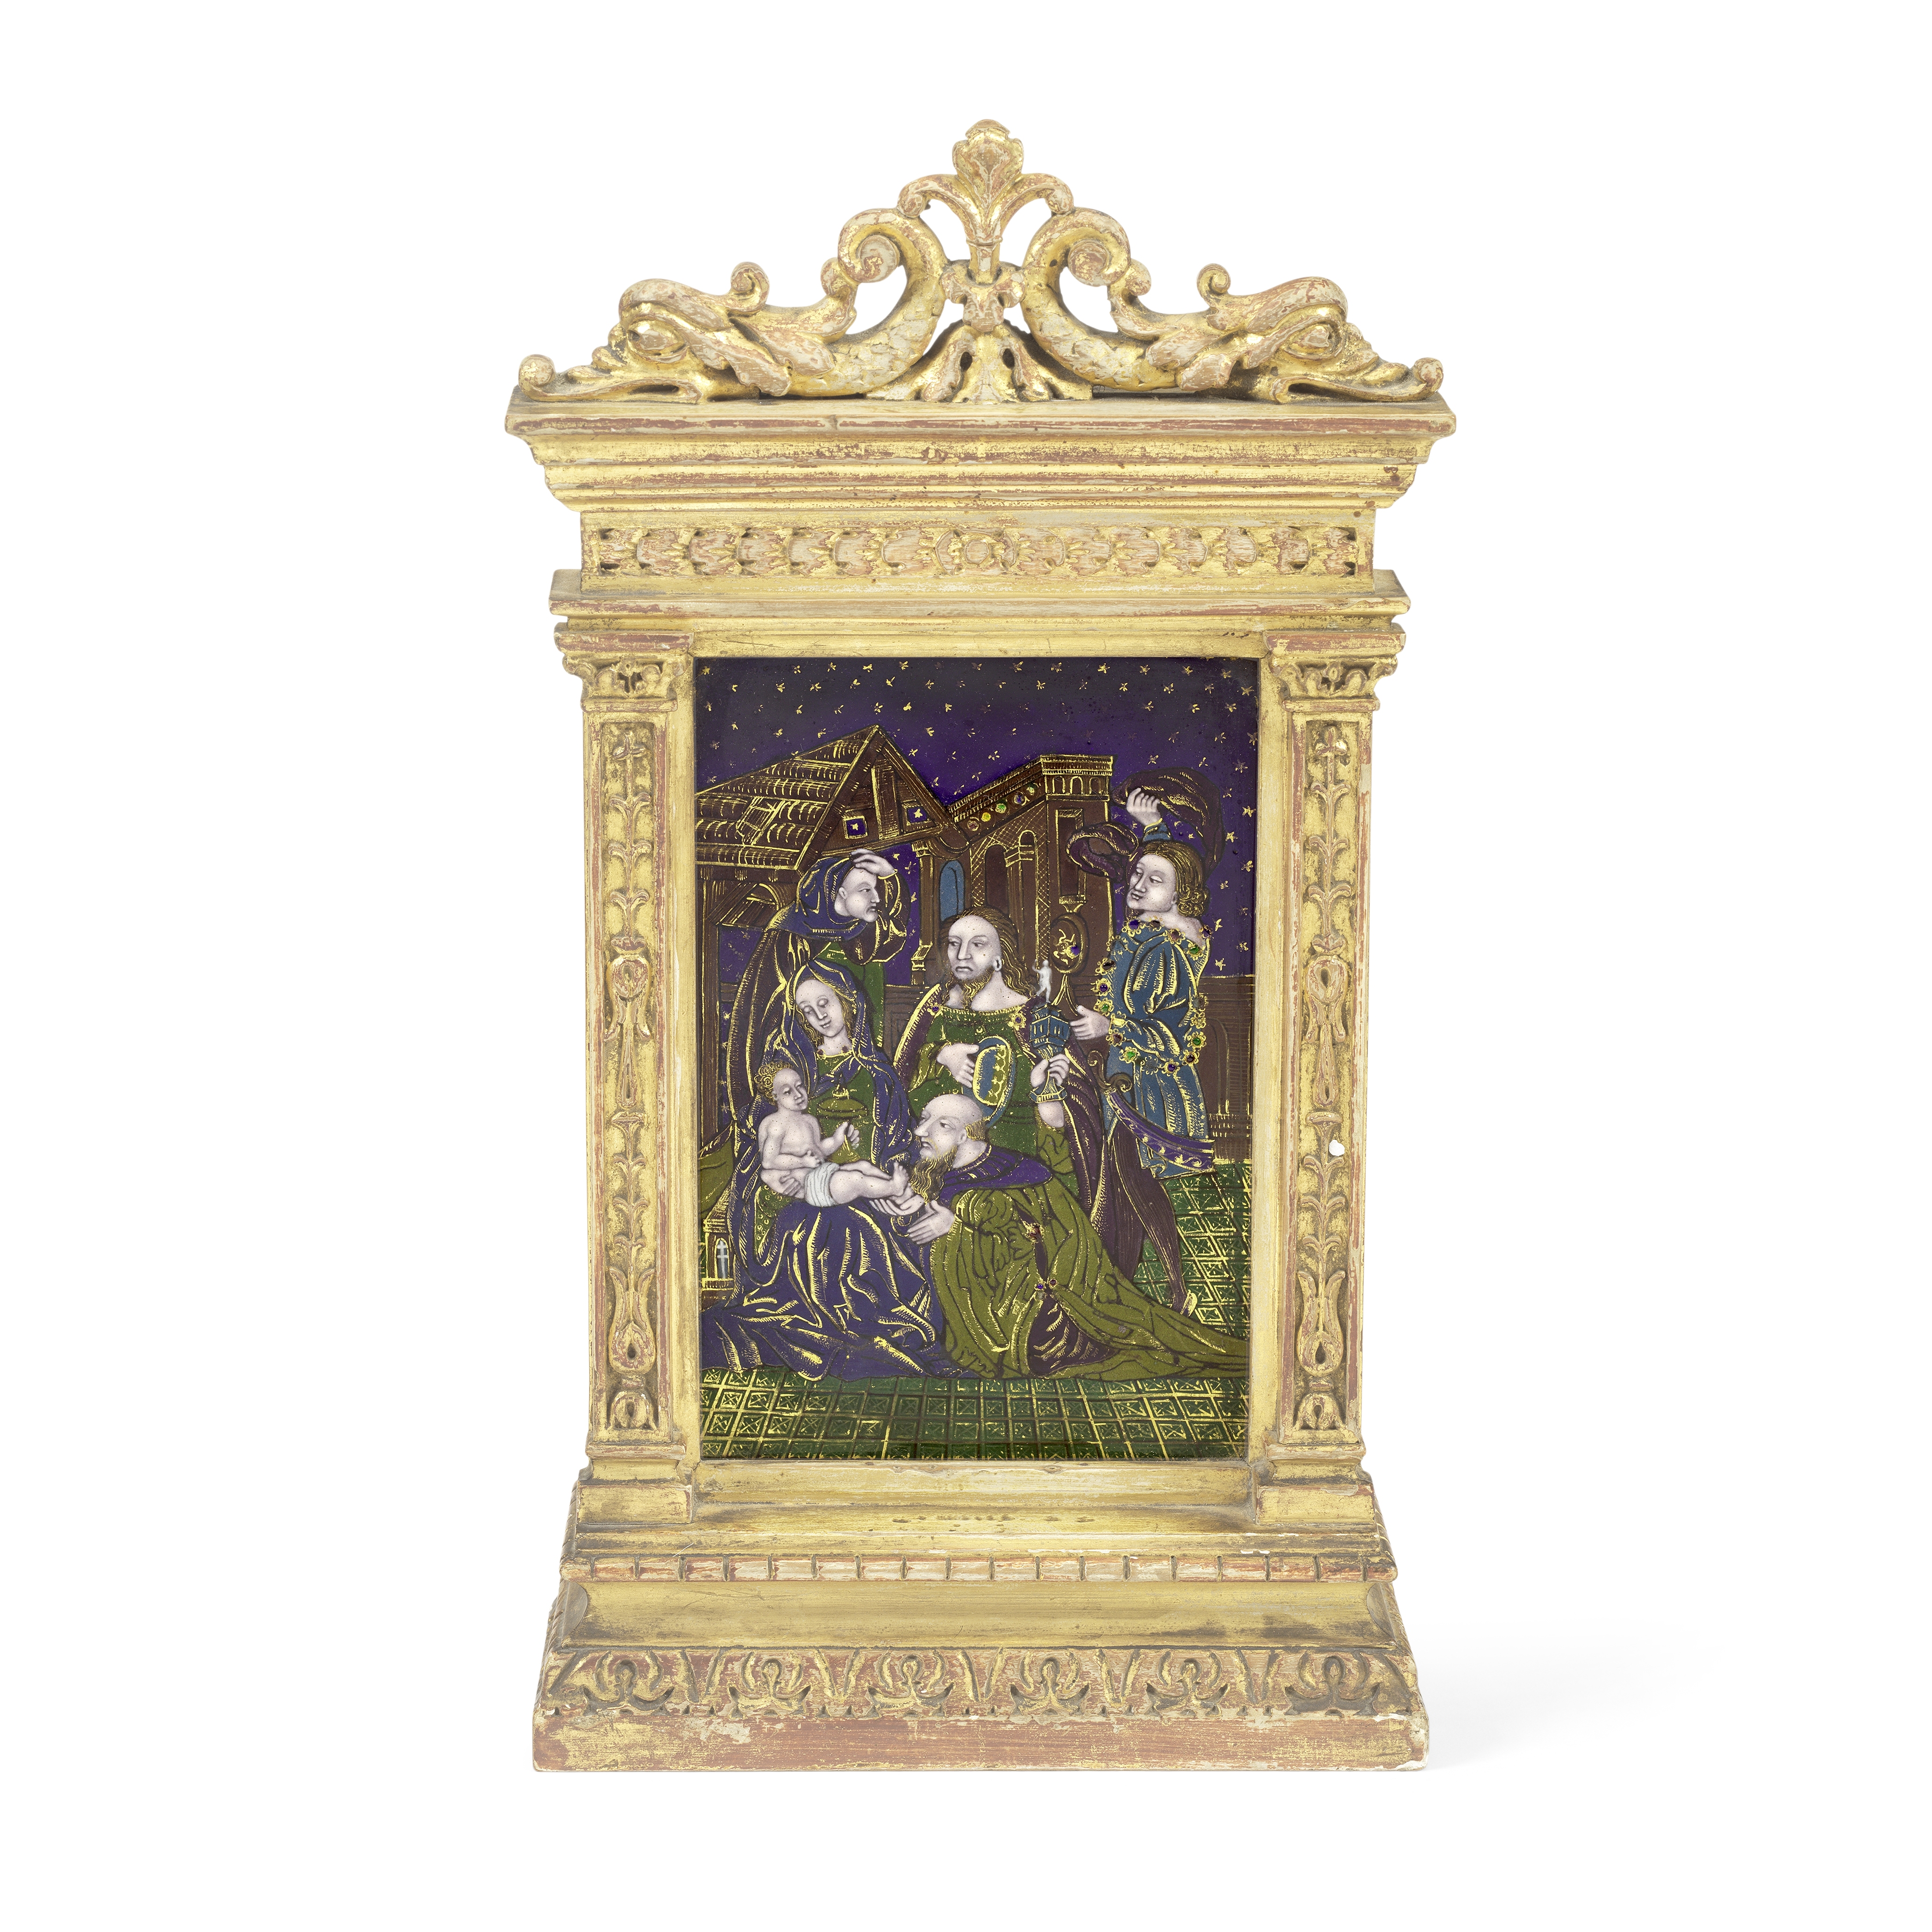 A Limoges style enamel plaque depicting the Adoration of the Magi mounted within a carved and gil...